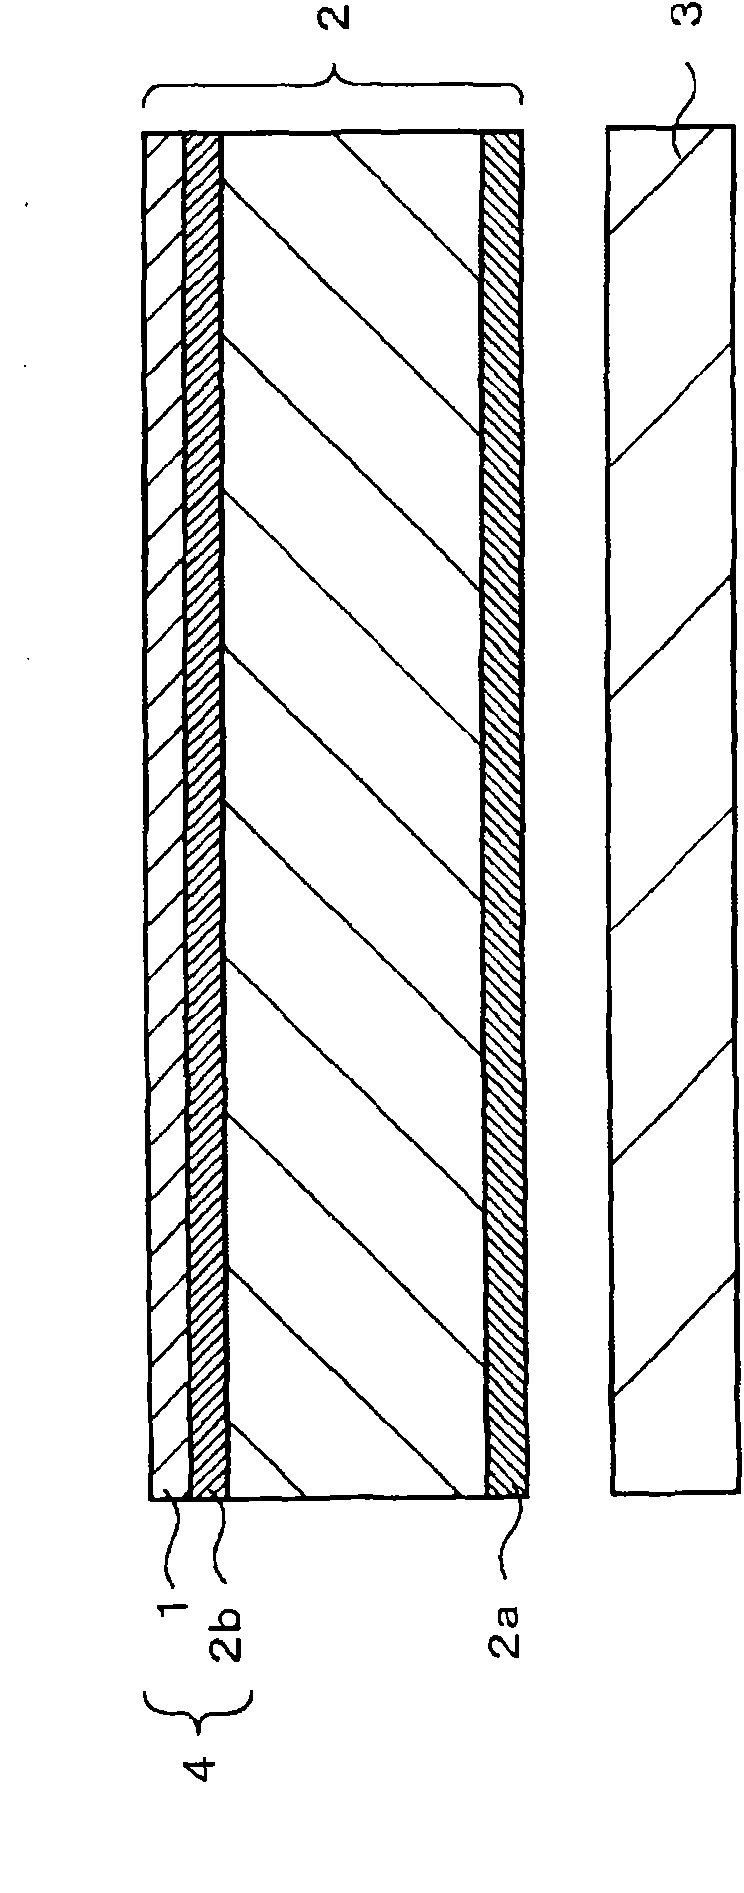 Optical element and method for making the same, master and method for making the same, and display apparatus